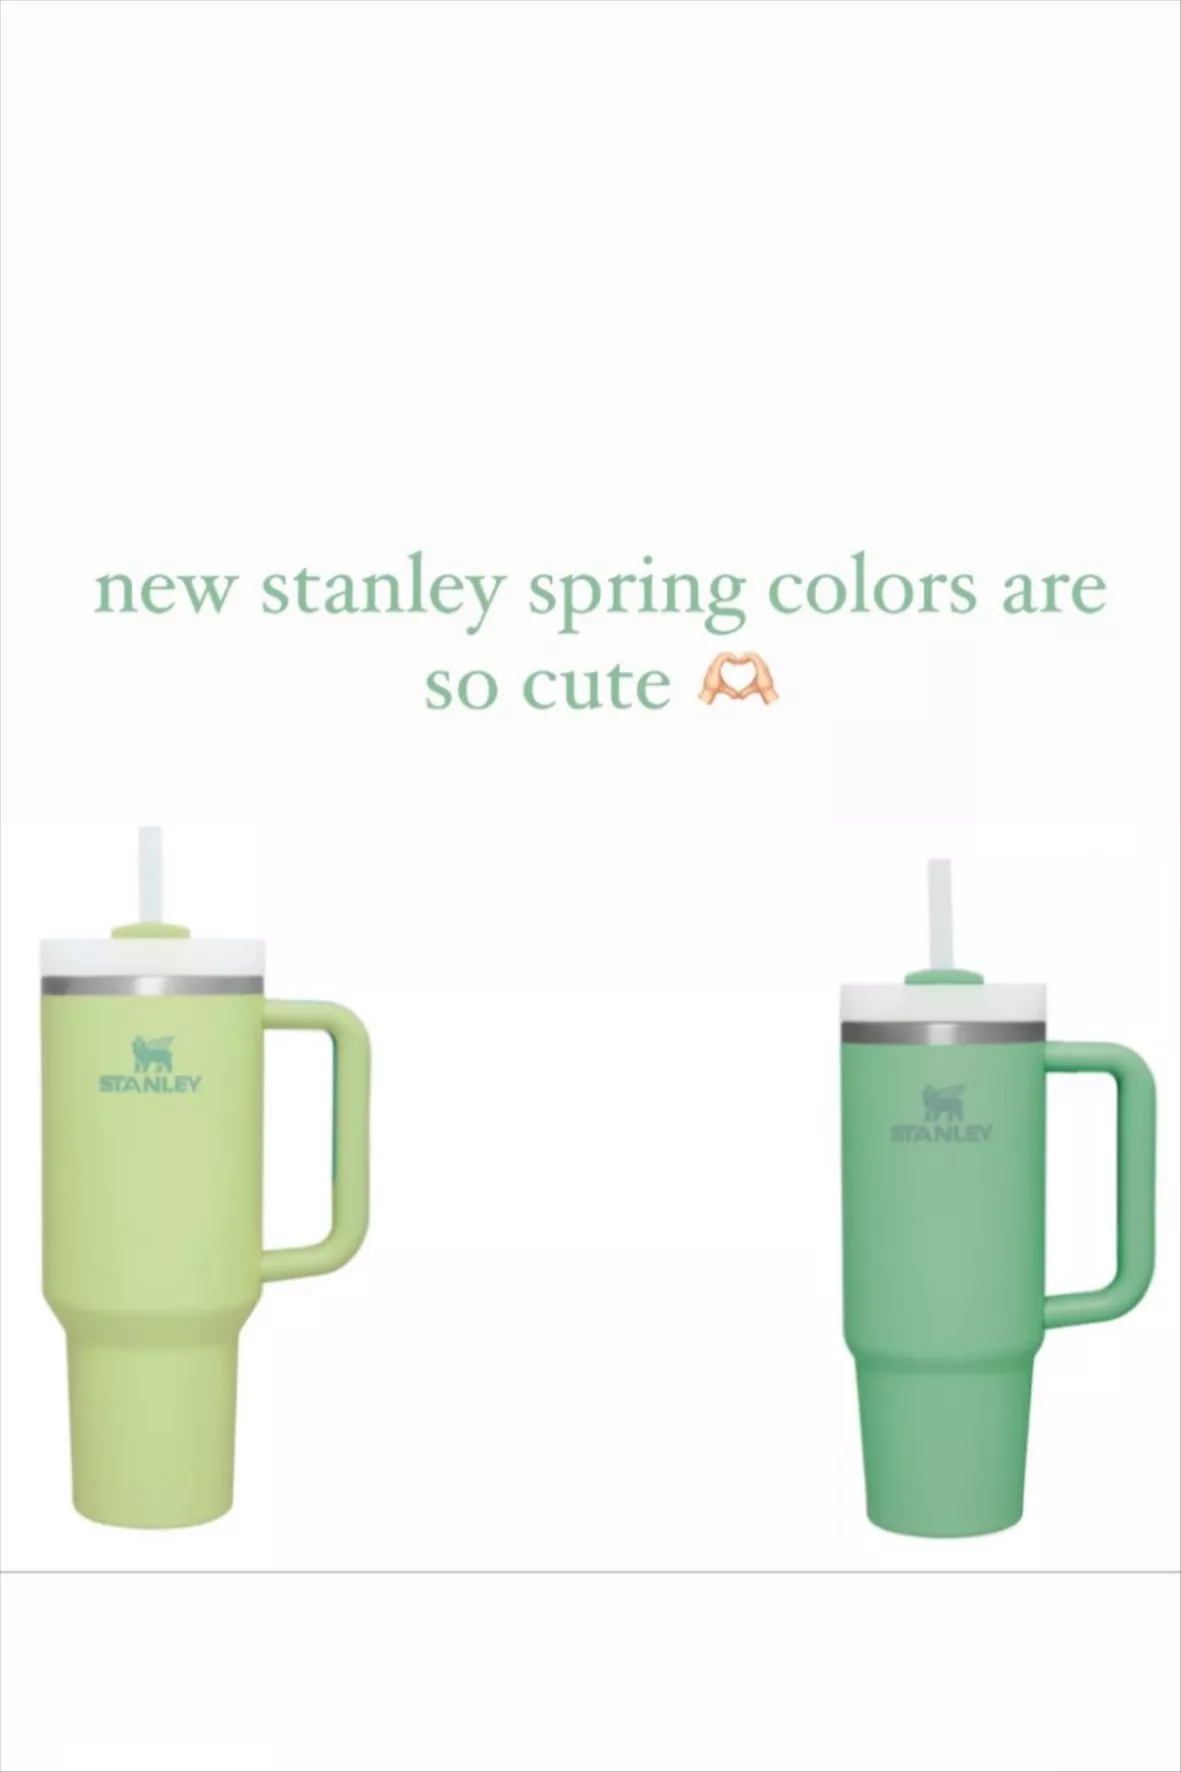 New stanley colors are prefect for the spring!! #stanleycup #stanleytu